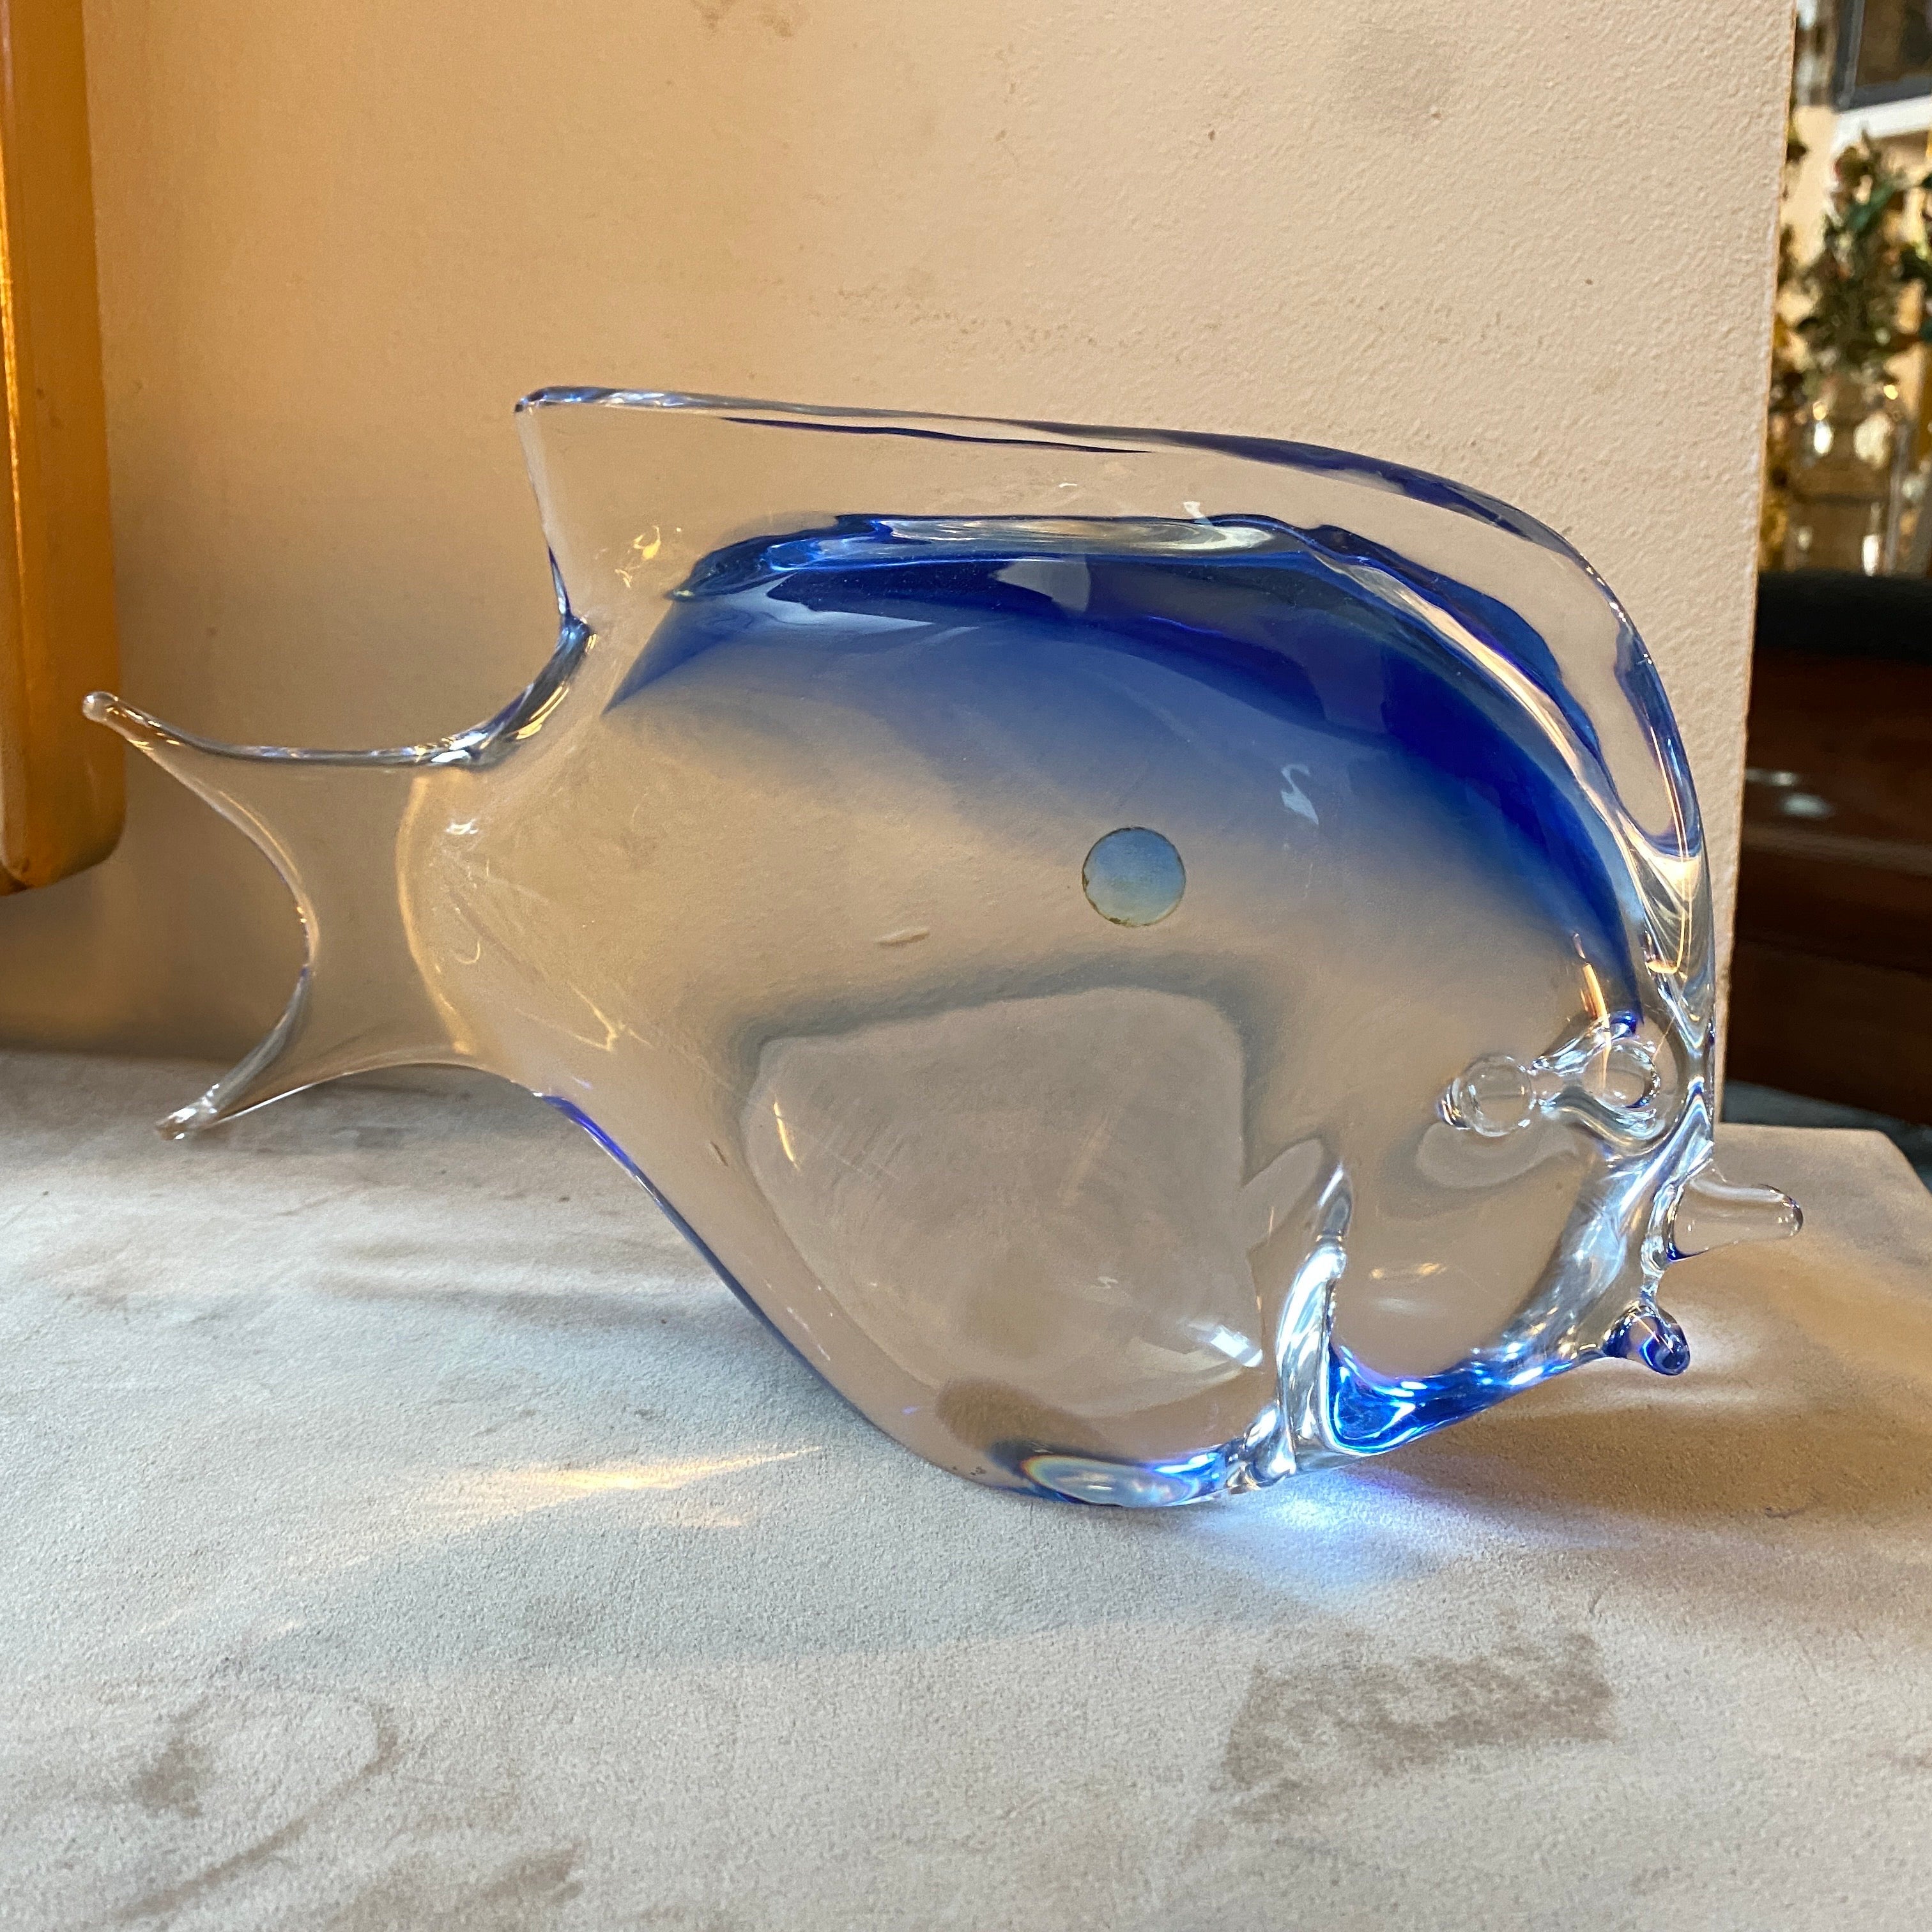 A blue sommerso murano glass modernist figure of a tropical fish manufactured in Murano in the Seventies. It's in perfect conditions and labeled on a side made in Italy Murano. It's a stunning and artistic decorative piece that showcases the